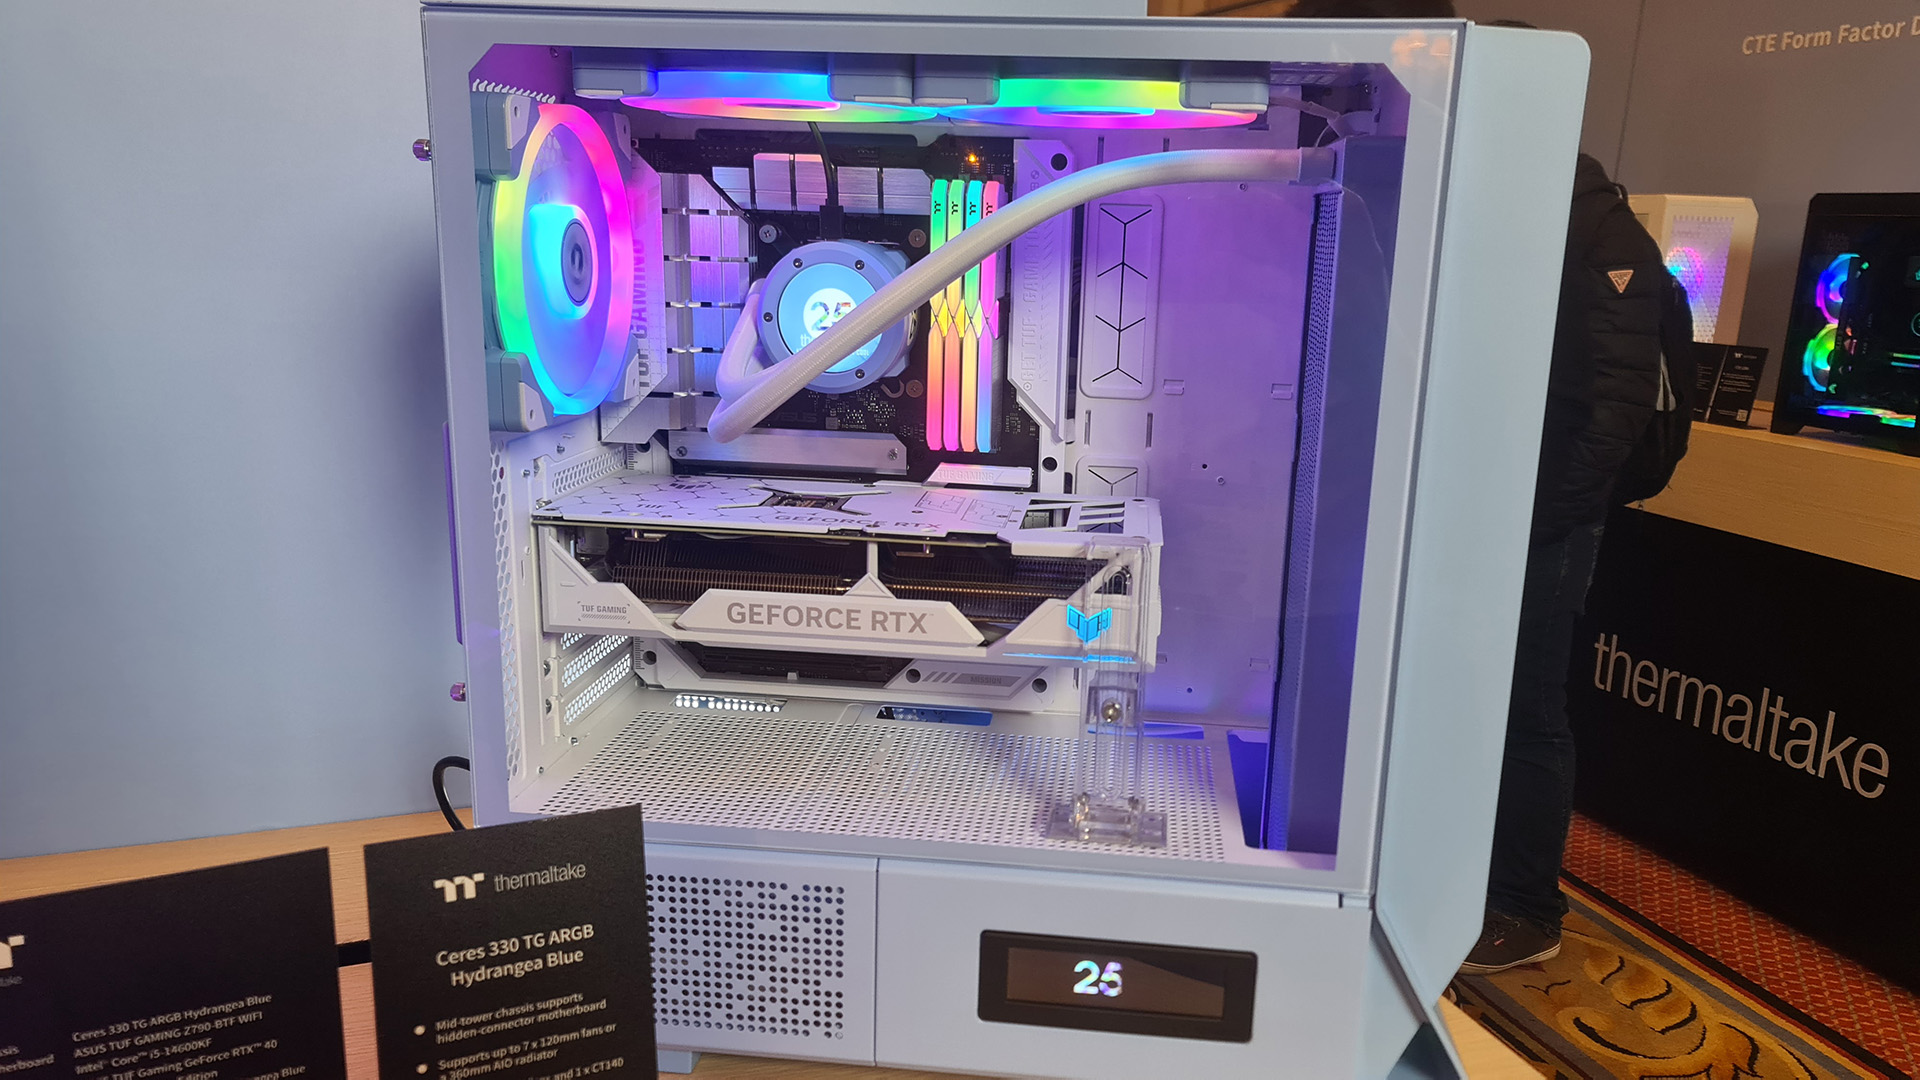 A Thermaltake case with few visible cables.